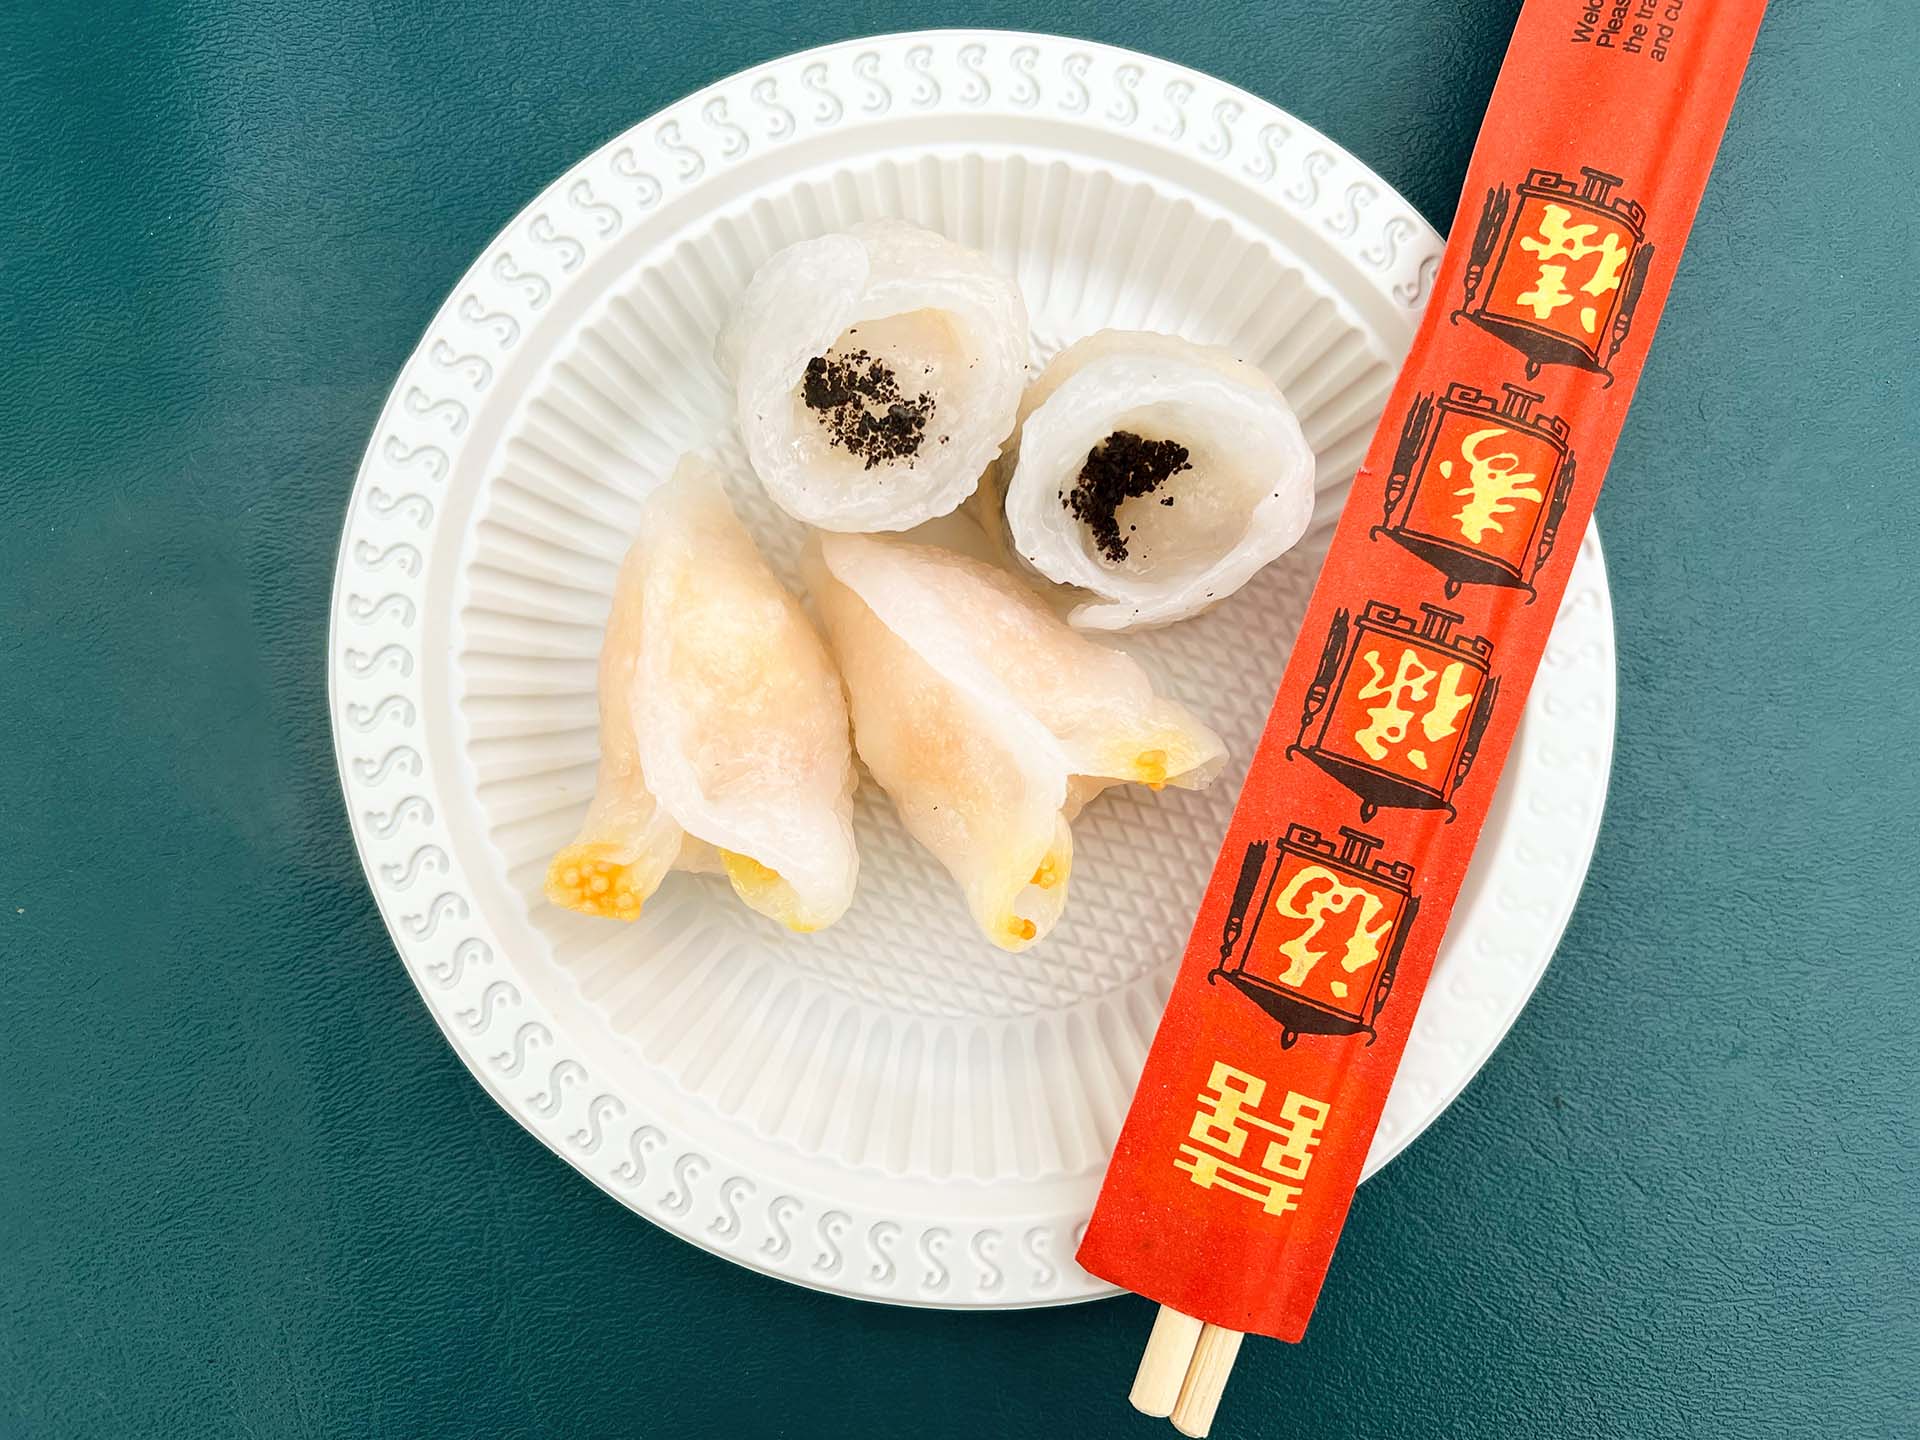 Two varieties of dim sum on a paper plate. One of them is topped with black truffle shavings.